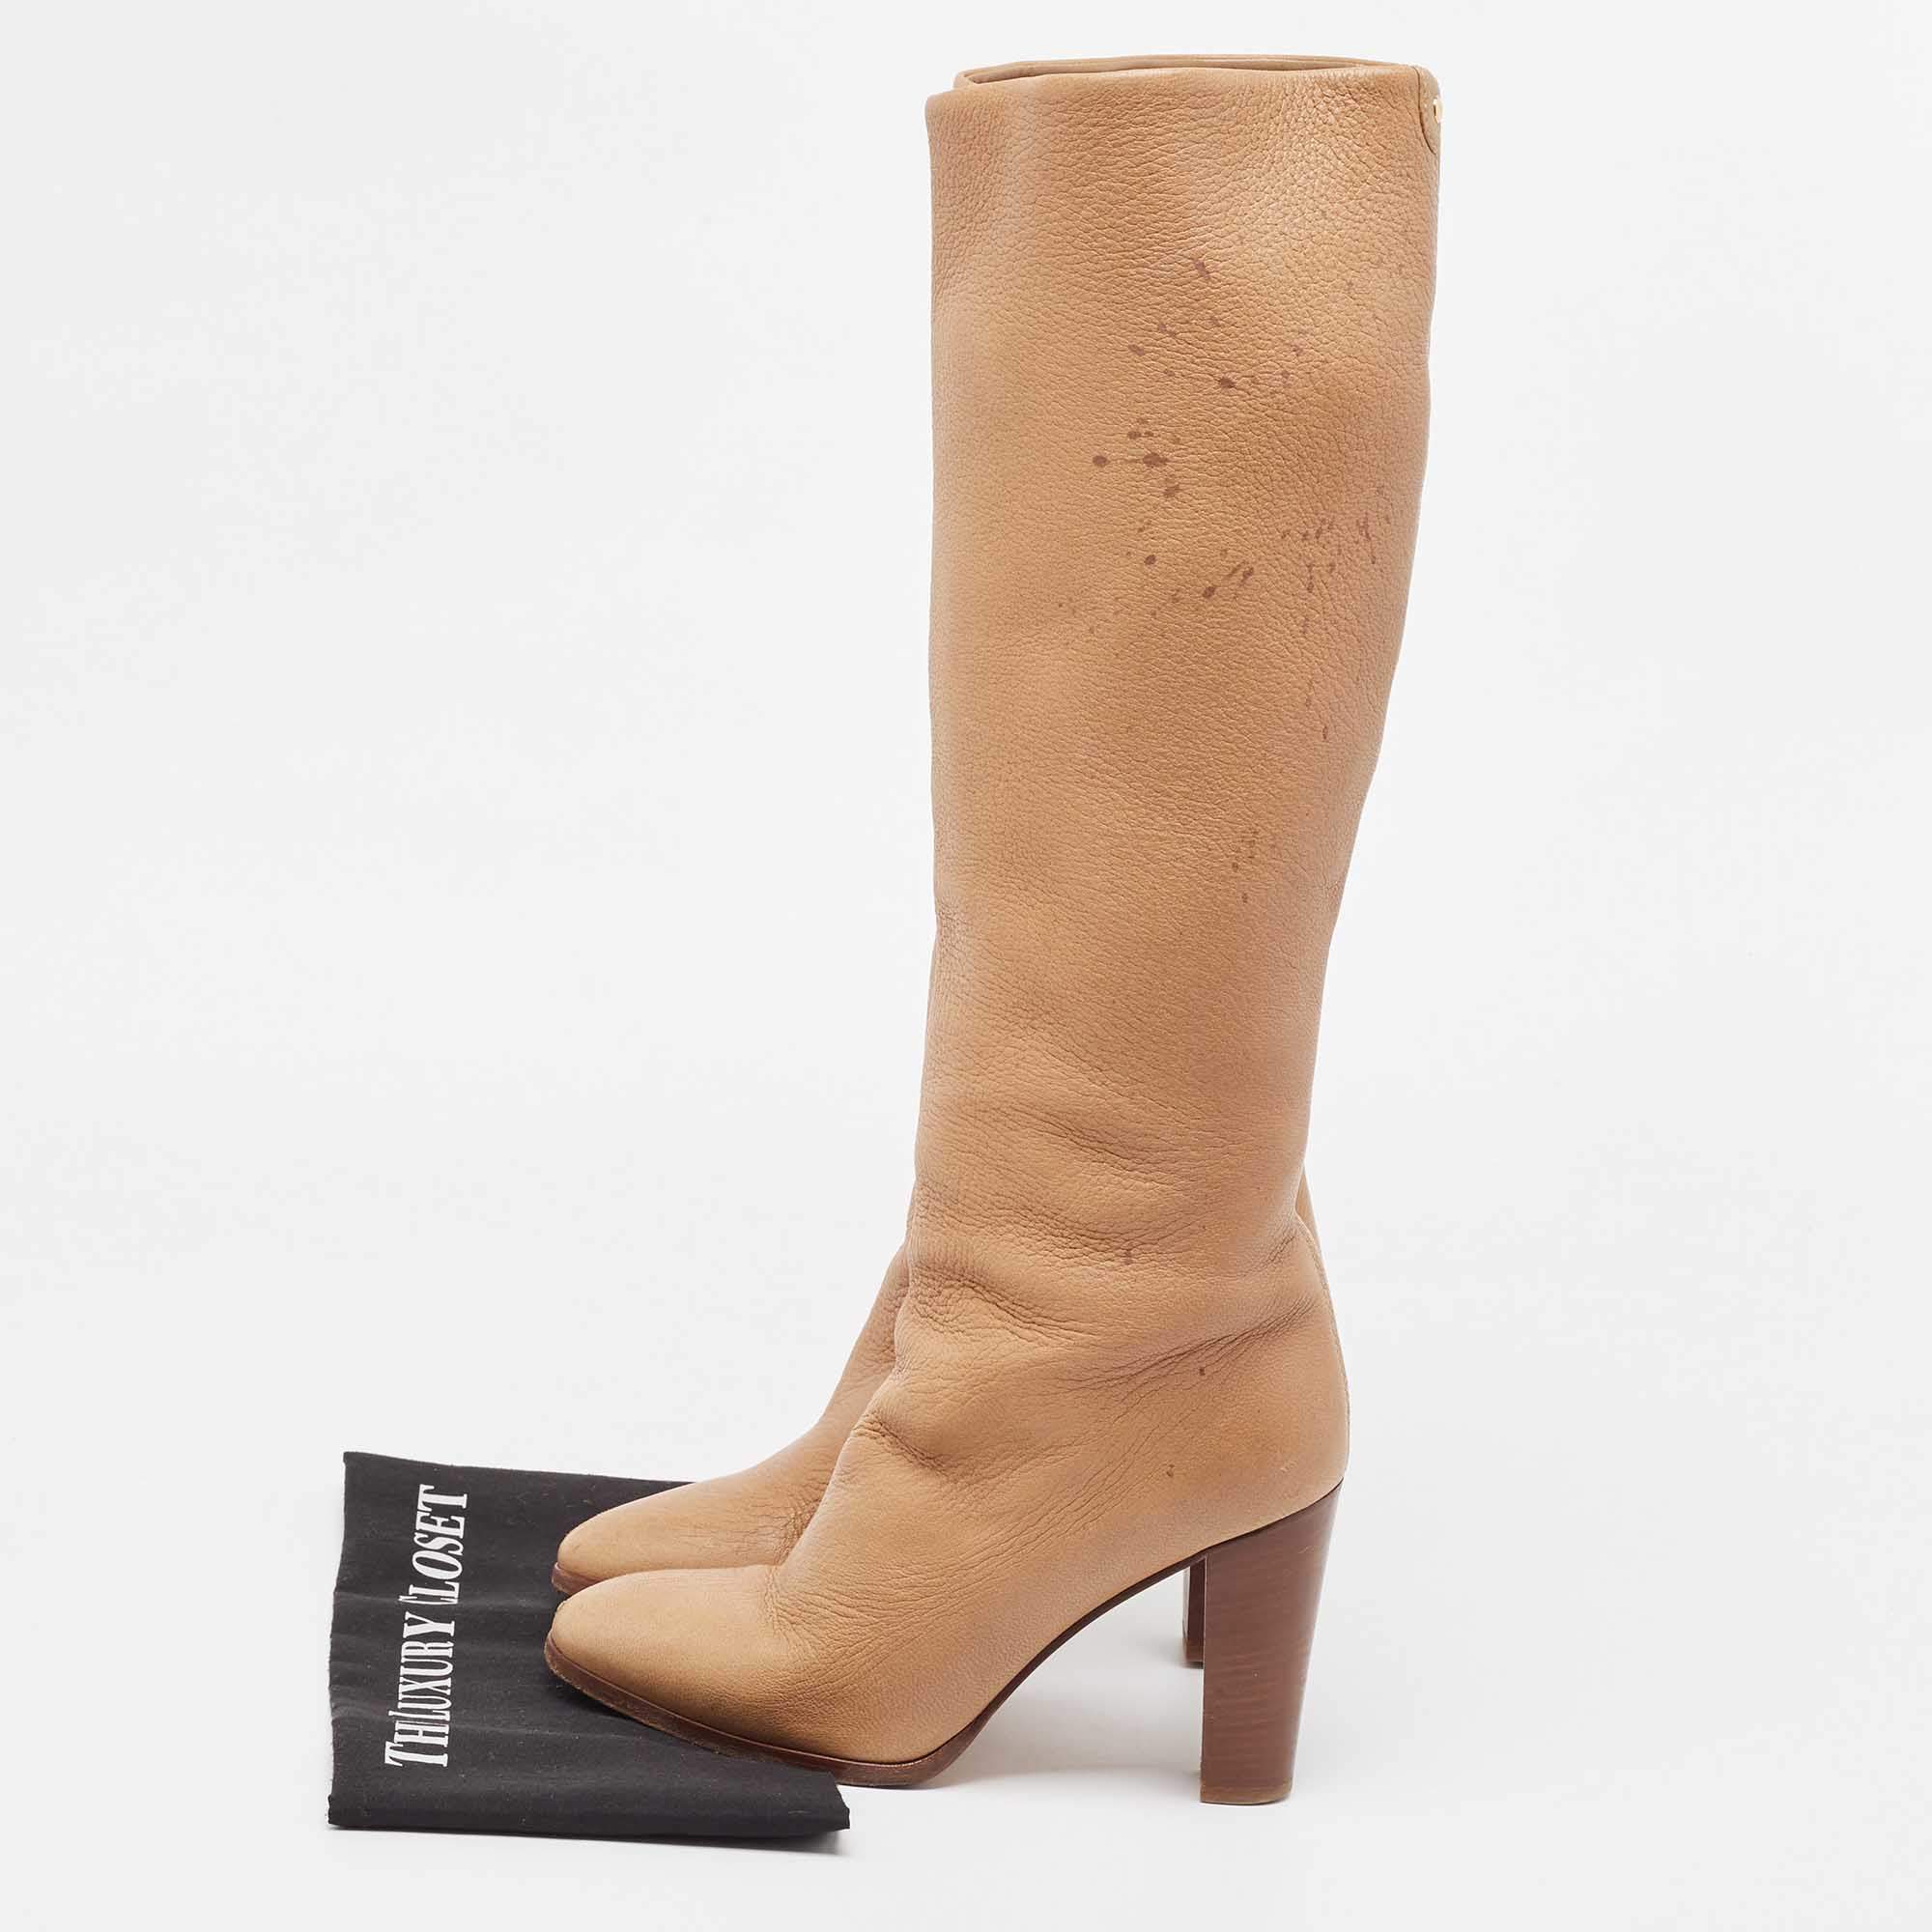 Louis Vuitton 'Silhouette' Boots - Women's 39 – Fashionably Yours